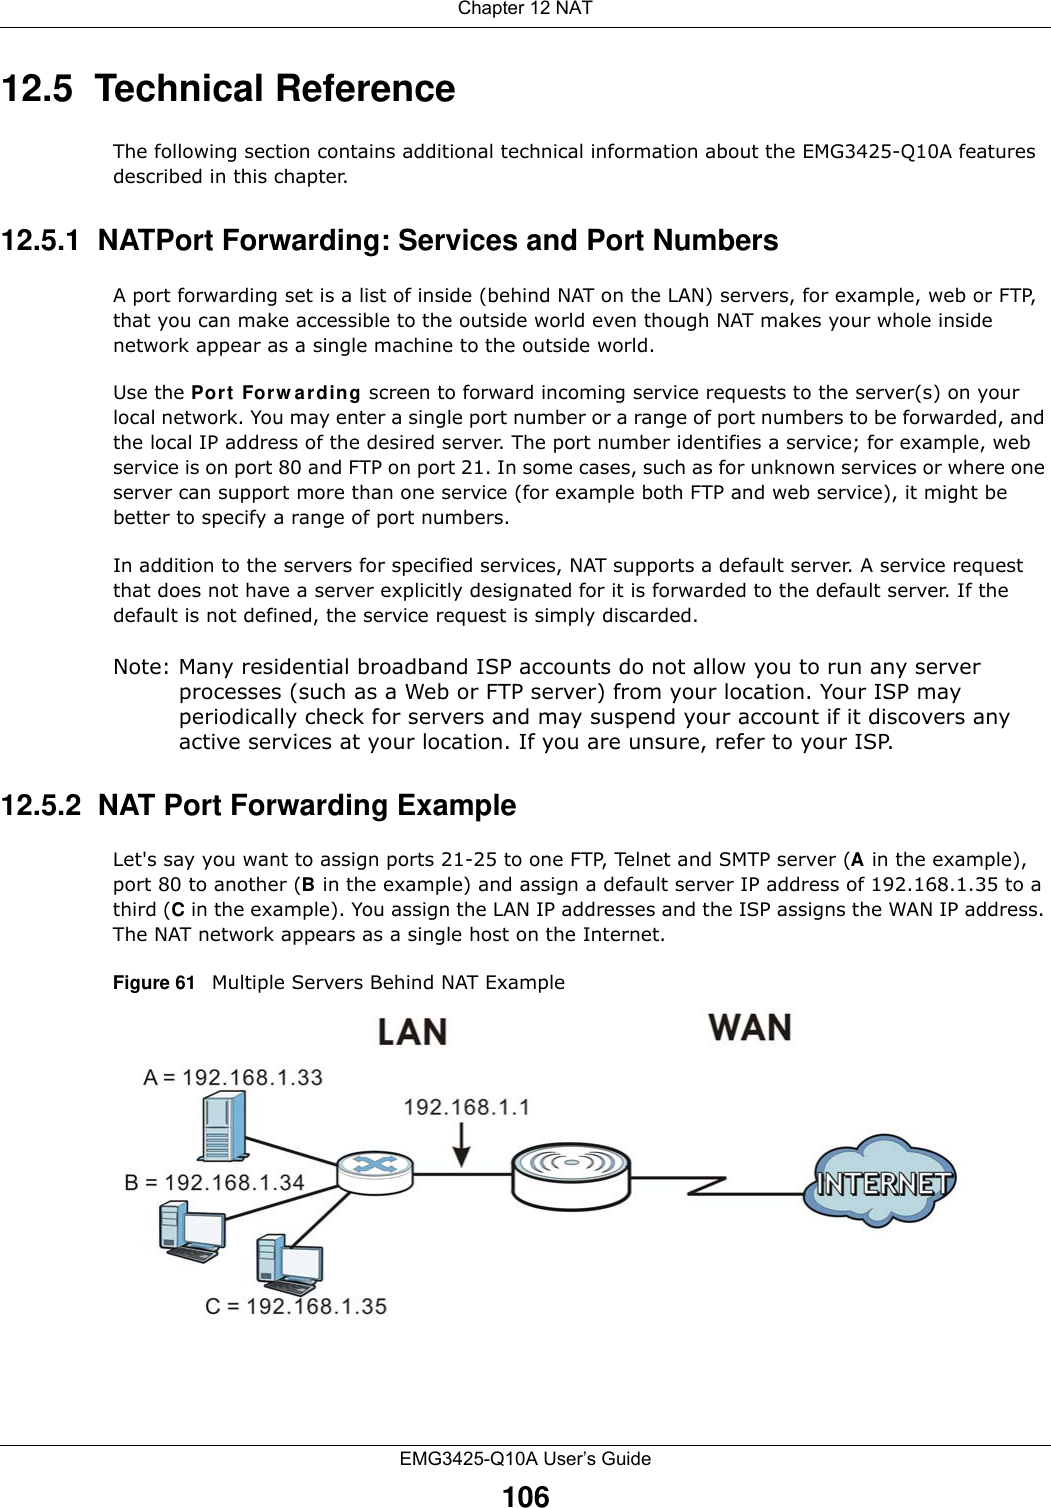 Chapter 12 NATEMG3425-Q10A User’s Guide10612.5  Technical ReferenceThe following section contains additional technical information about the EMG3425-Q10A features described in this chapter.12.5.1  NATPort Forwarding: Services and Port NumbersA port forwarding set is a list of inside (behind NAT on the LAN) servers, for example, web or FTP, that you can make accessible to the outside world even though NAT makes your whole inside network appear as a single machine to the outside world. Use the Port  Forw a rding screen to forward incoming service requests to the server(s) on your local network. You may enter a single port number or a range of port numbers to be forwarded, and the local IP address of the desired server. The port number identifies a service; for example, web service is on port 80 and FTP on port 21. In some cases, such as for unknown services or where one server can support more than one service (for example both FTP and web service), it might be better to specify a range of port numbers.In addition to the servers for specified services, NAT supports a default server. A service request that does not have a server explicitly designated for it is forwarded to the default server. If the default is not defined, the service request is simply discarded.Note: Many residential broadband ISP accounts do not allow you to run any server processes (such as a Web or FTP server) from your location. Your ISP may periodically check for servers and may suspend your account if it discovers any active services at your location. If you are unsure, refer to your ISP.12.5.2  NAT Port Forwarding ExampleLet&apos;s say you want to assign ports 21-25 to one FTP, Telnet and SMTP server (A in the example), port 80 to another (B in the example) and assign a default server IP address of 192.168.1.35 to a third (C in the example). You assign the LAN IP addresses and the ISP assigns the WAN IP address. The NAT network appears as a single host on the Internet.Figure 61   Multiple Servers Behind NAT Example